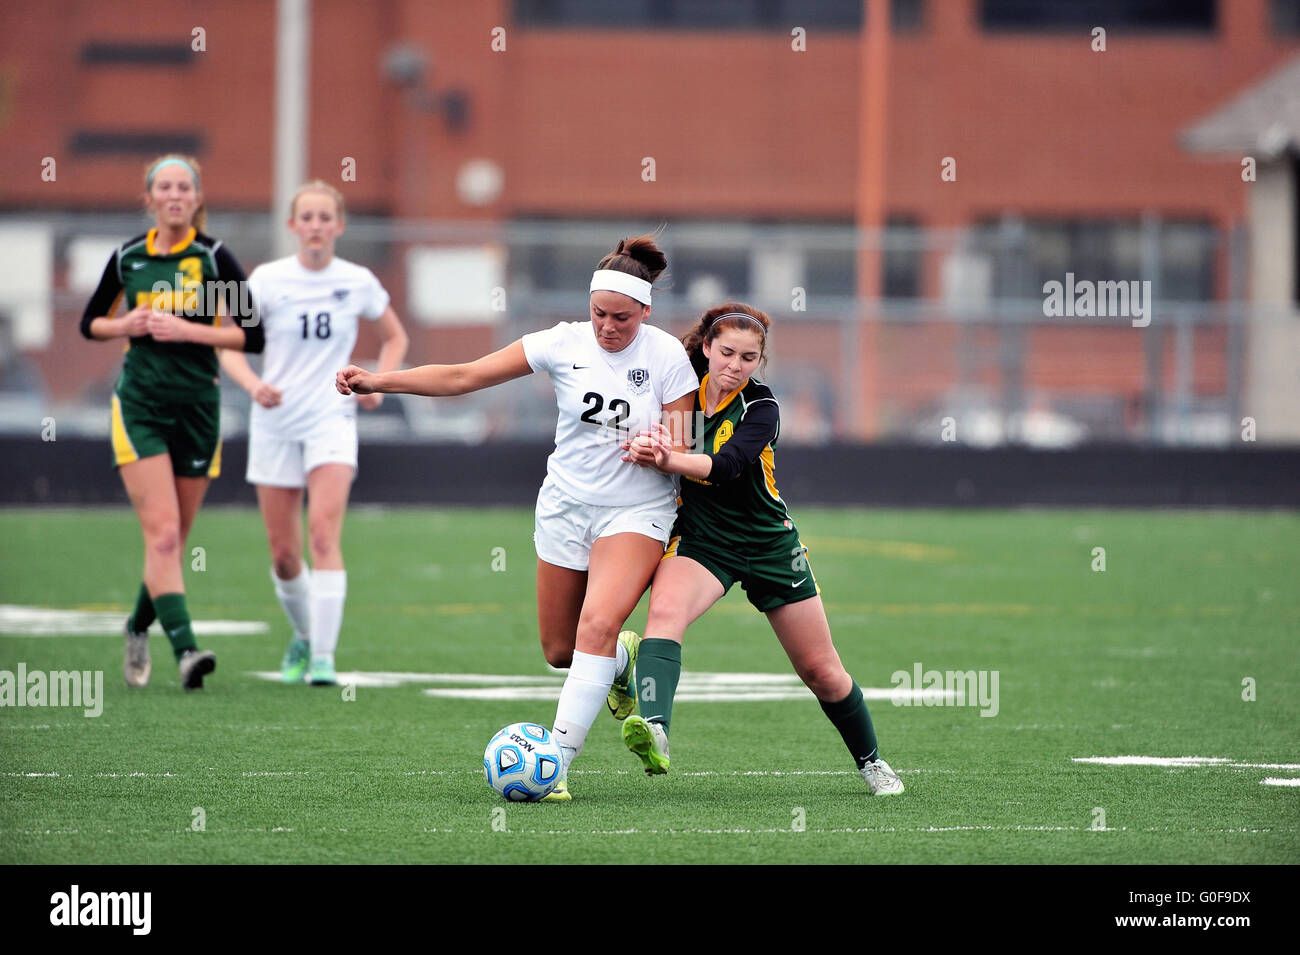 Opposing players battle for control of the all near midfield during a high school soccer match. USA. Stock Photo